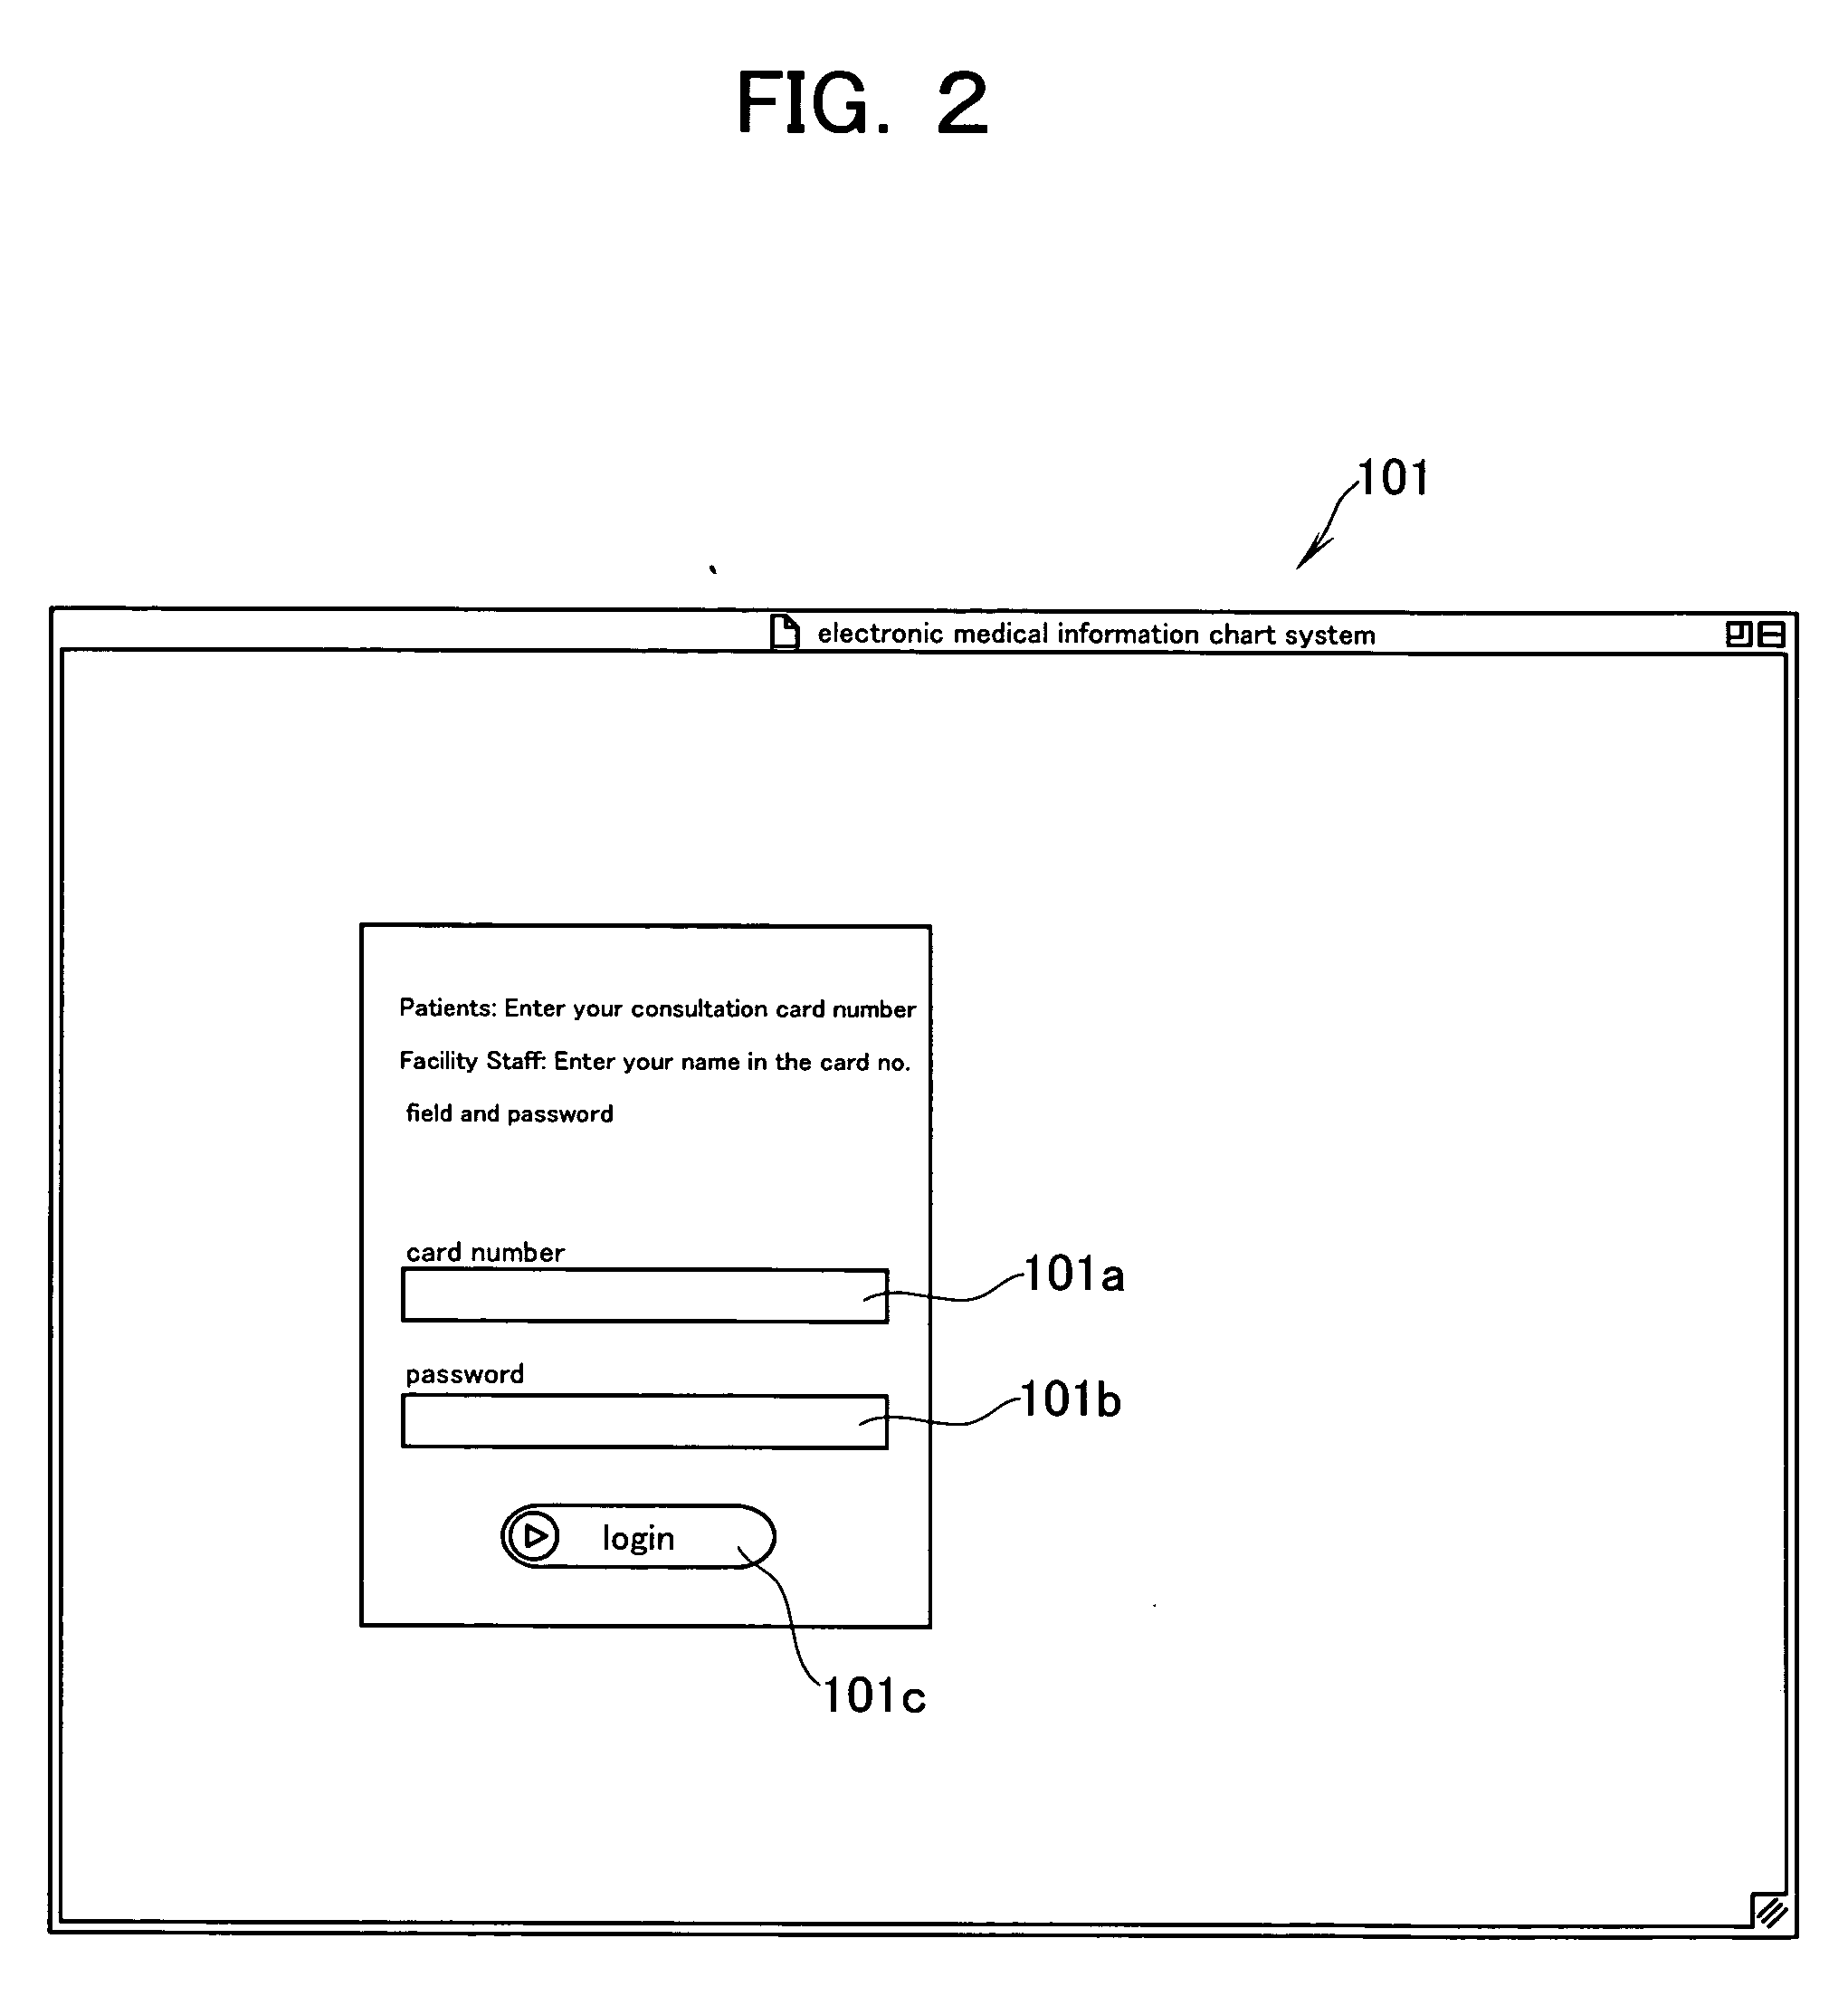 Electronic medical information system, electronic medical information programs, and computer-readable recording media for storing the electronic medical information